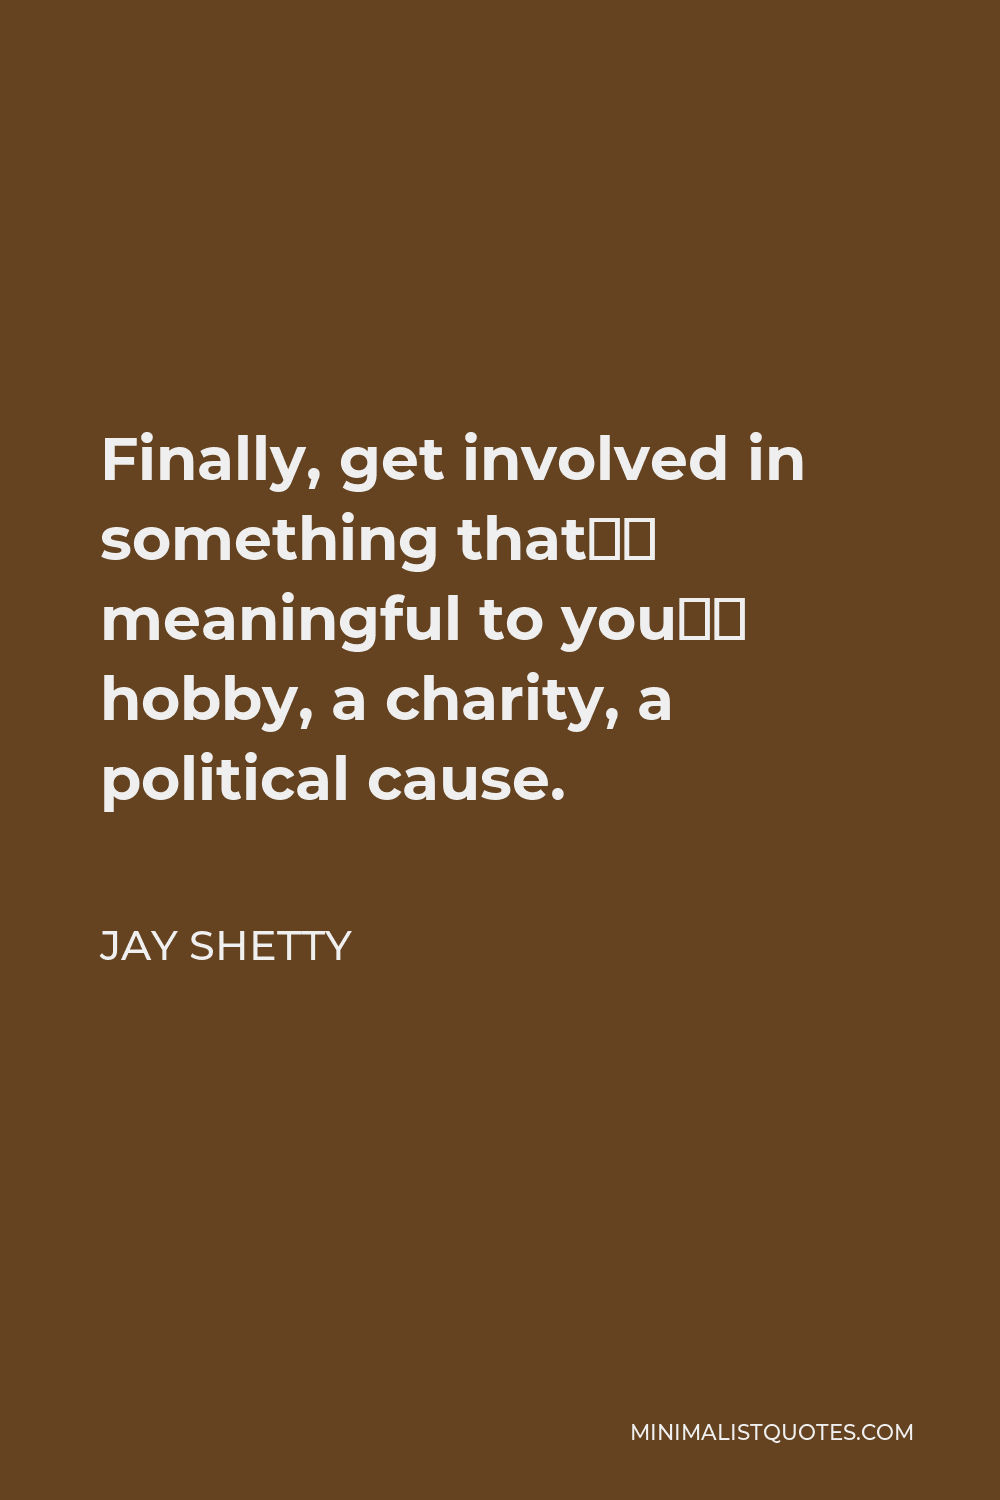 Jay Shetty Quote - Finally, get involved in something that’s meaningful to you—a hobby, a charity, a political cause.